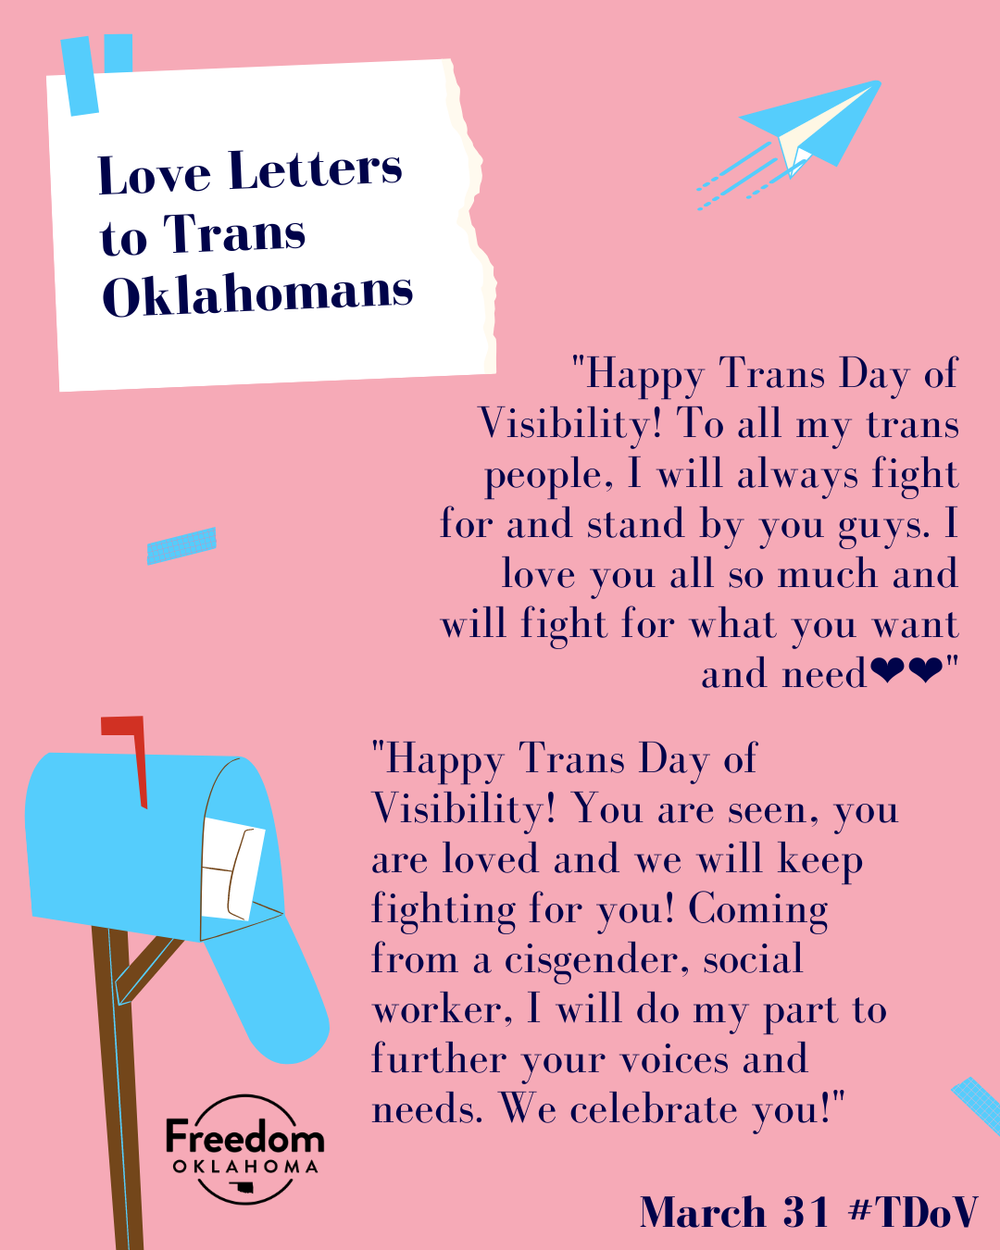  Similar pink graphic with the text for 2 loves letters. #1: "Happy Trans Day of Visibility! To all my trans people, I will always fight for and stand by you guys. I love you all so much and will fight for what you want and need" and #2: "Happy Trans